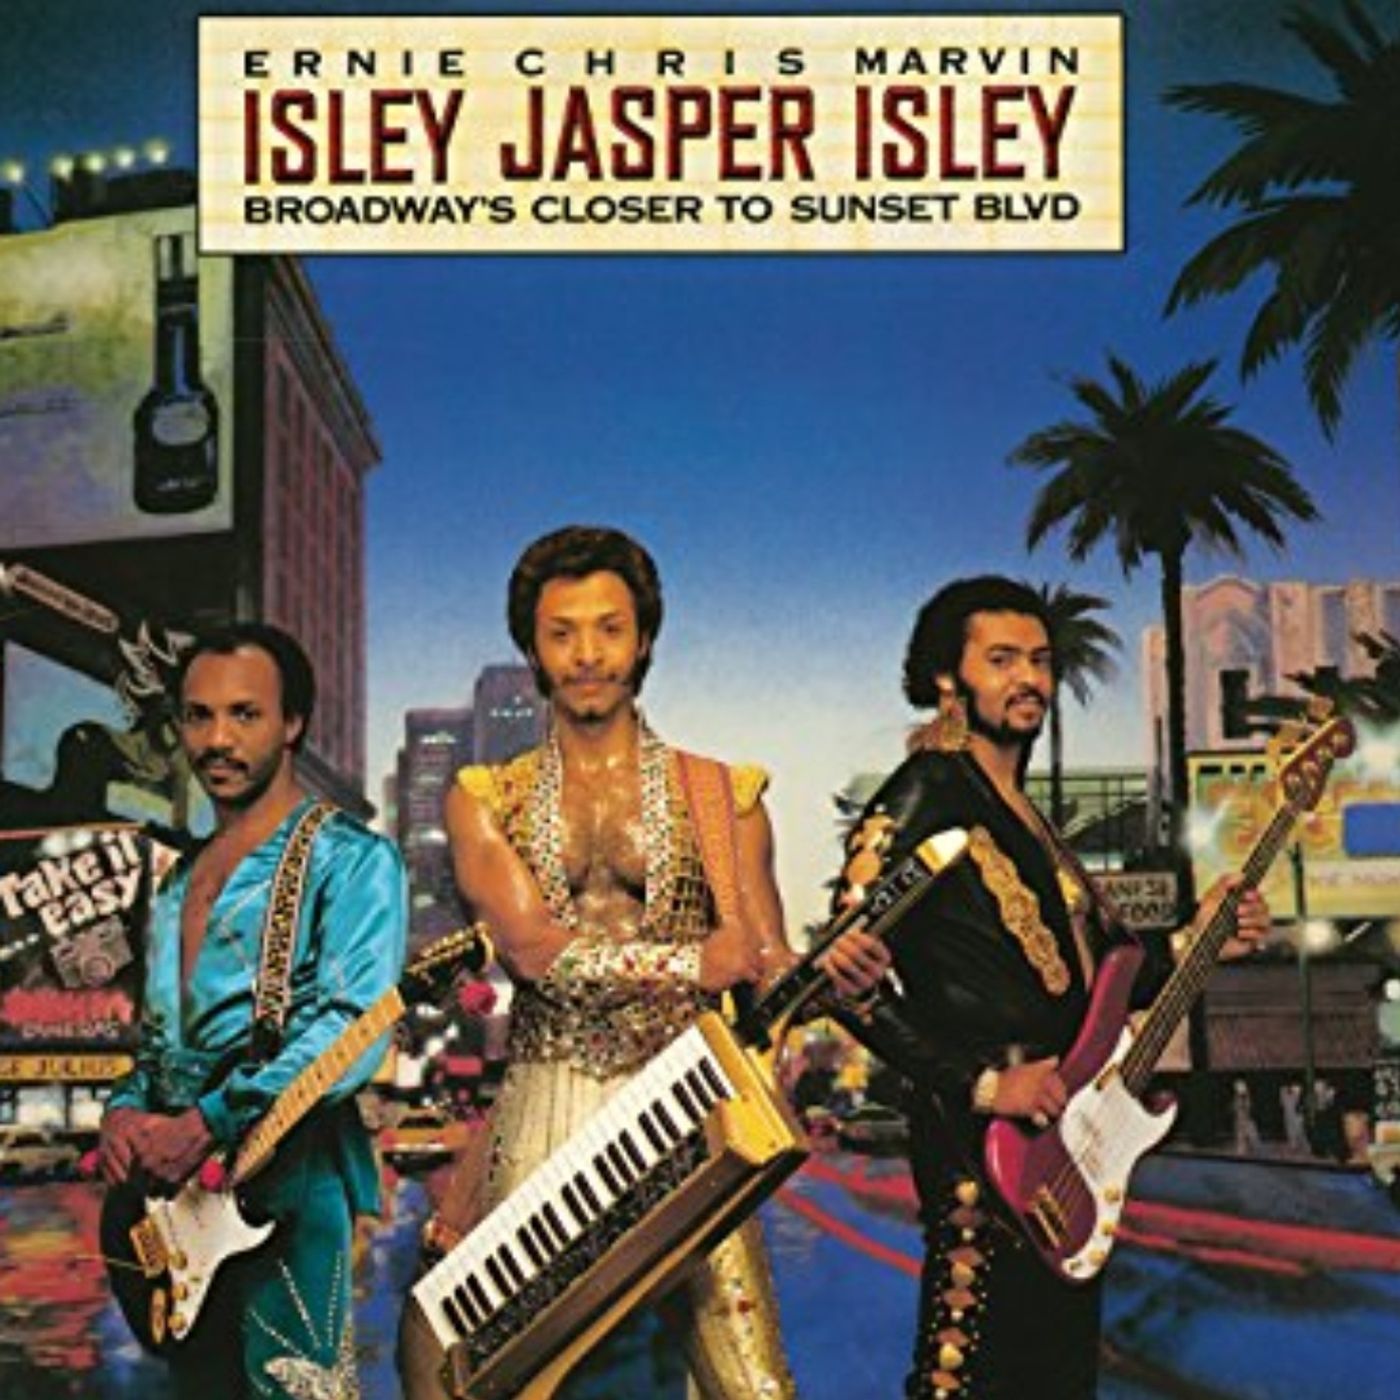 BIG Exclusive with Isley Brother's Chris Jasper